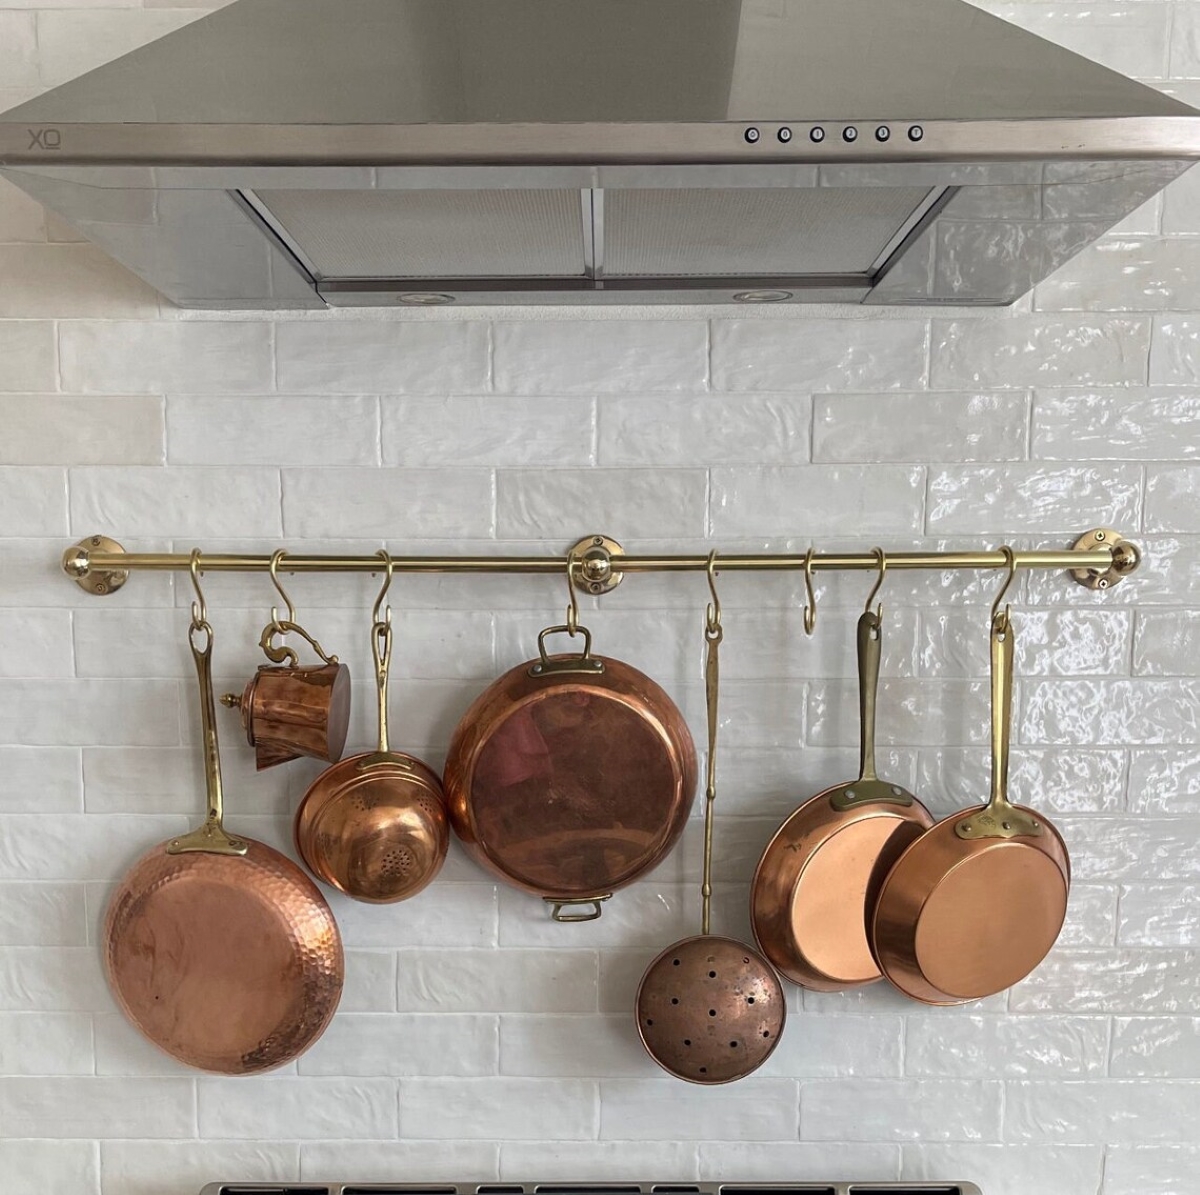 Copper pots hanging from kitchen wall.